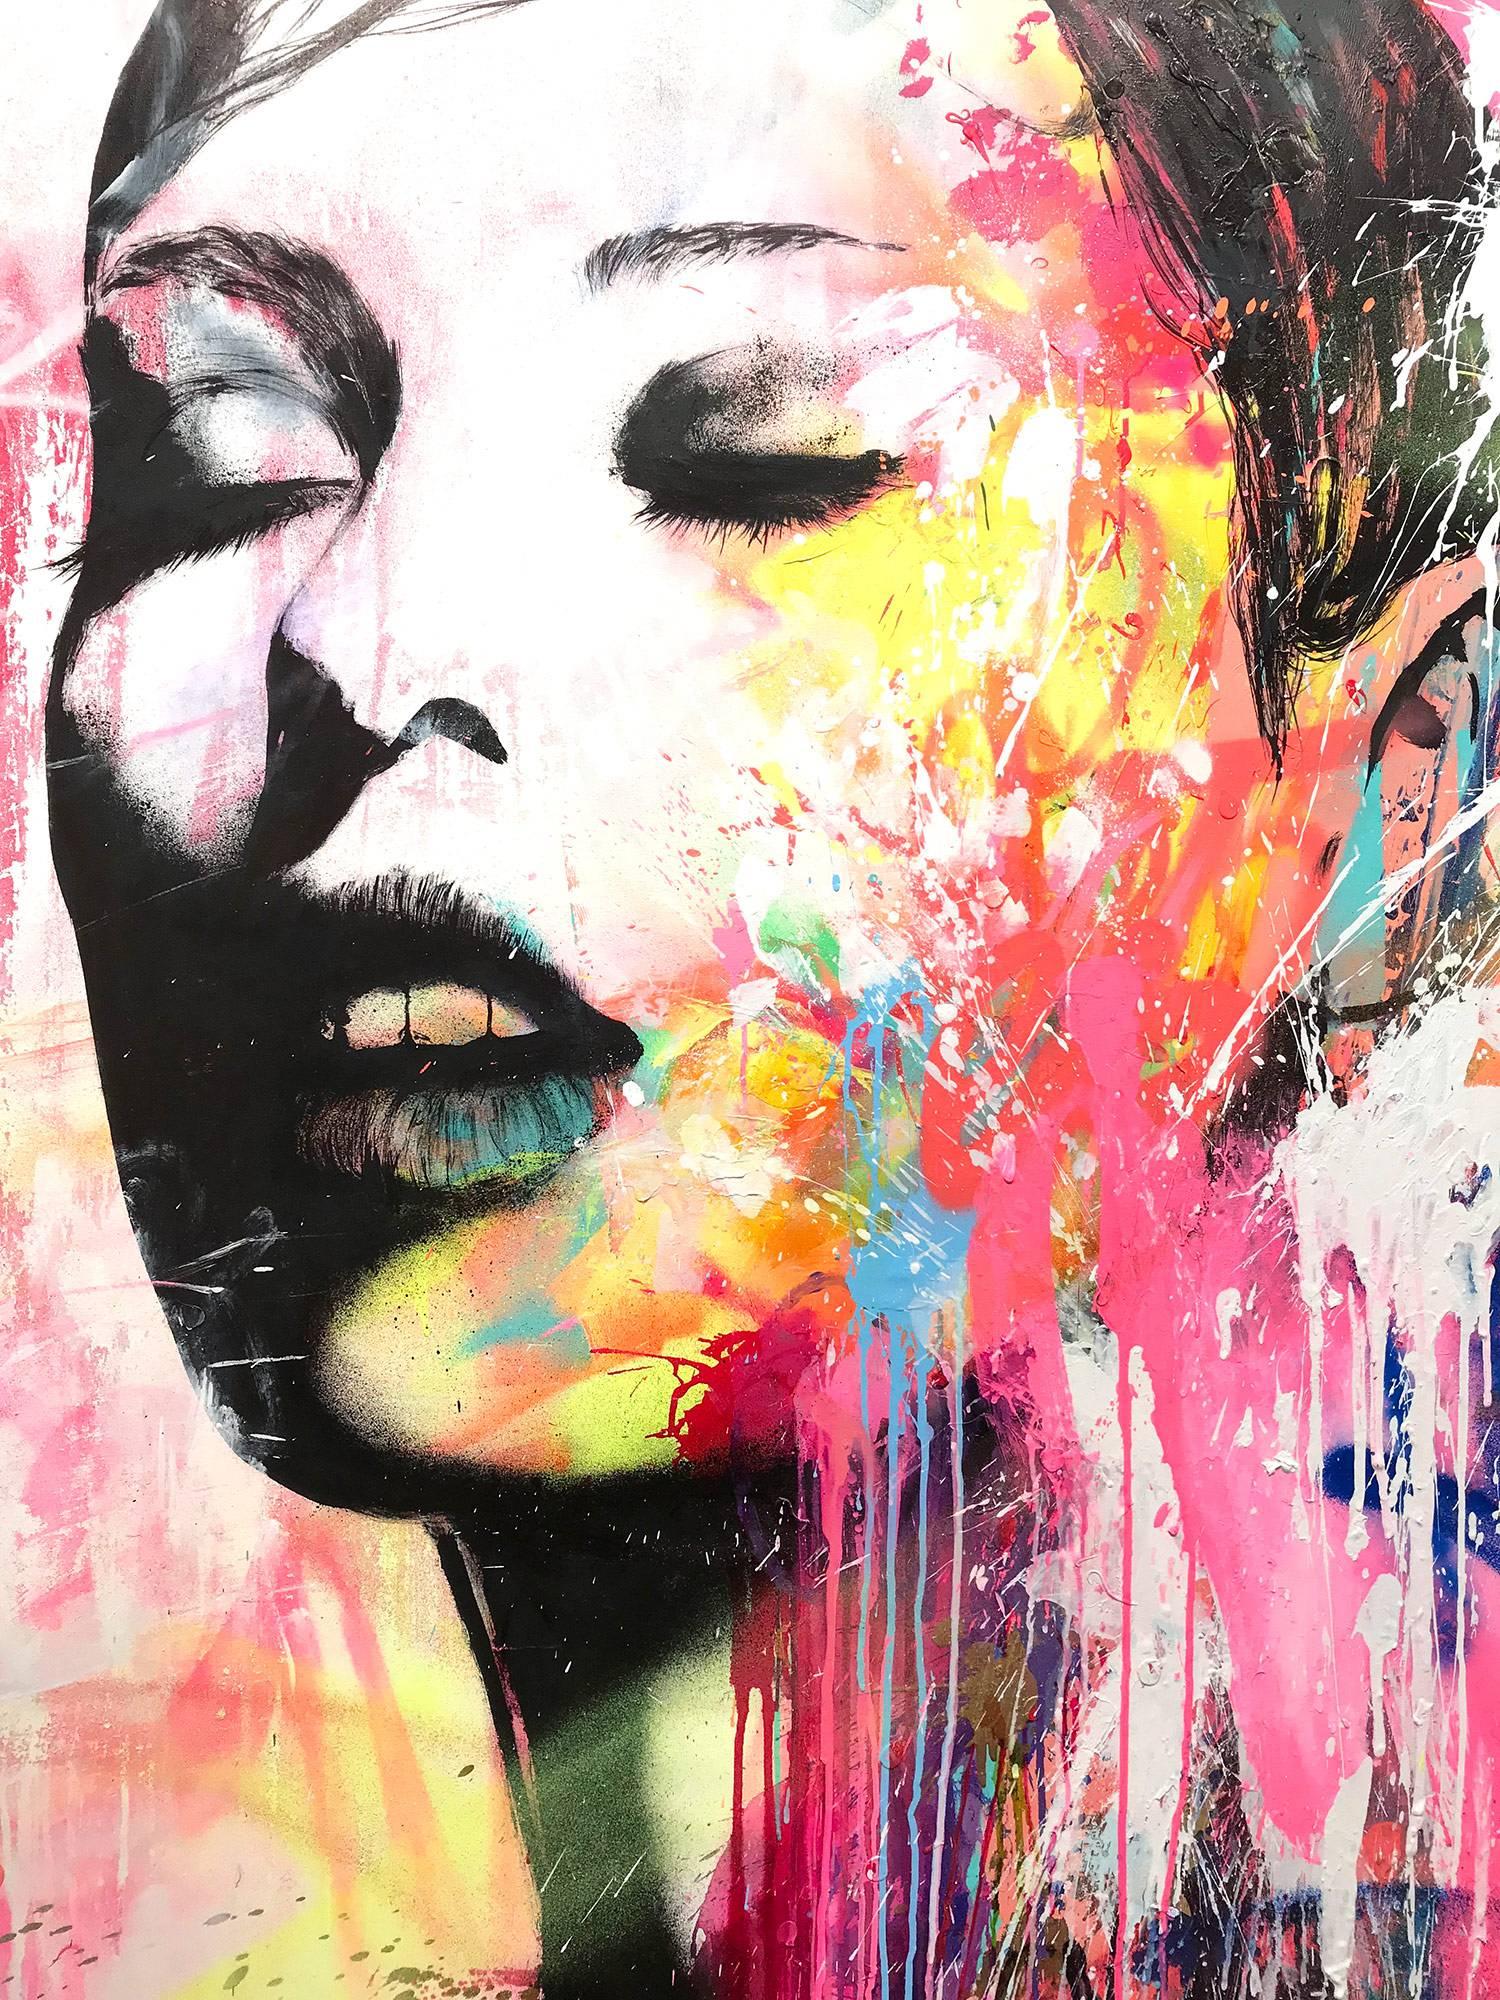 “Les Yeux Fermes, Souvent” Eyes Closed Often, Colorful, Abstract Street Art - Painting by J.M. Robert